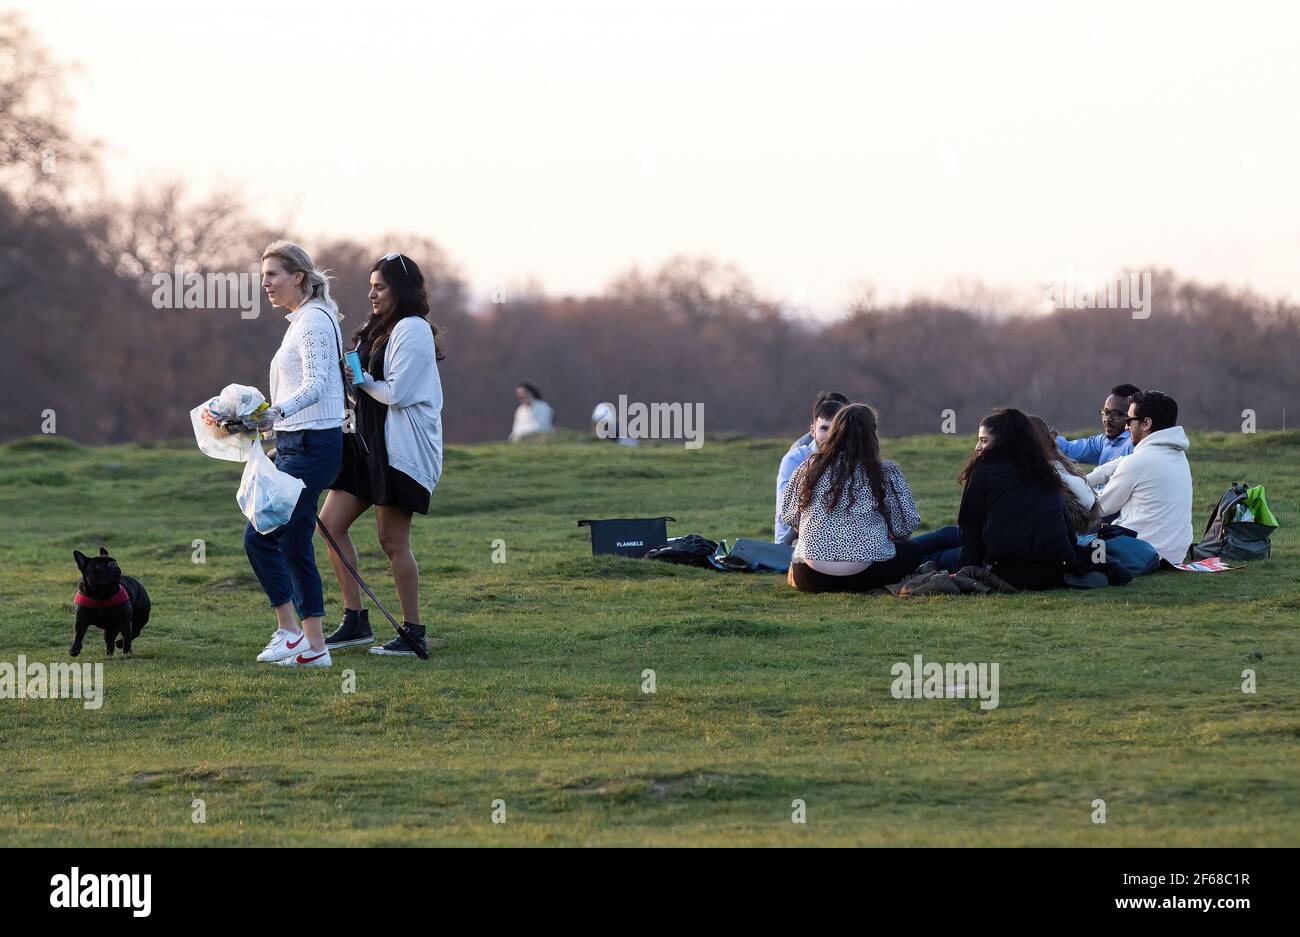 Members of the public relax and socialize in Richmond Park, London. The government further eased its restrictions as part of the 'roadmap' out of the Covid-19 lockdown measures imposed in January. Groups of either six people or two households are now allowed to meet outside and organized outdoor sport can resume once more. Stock Photo